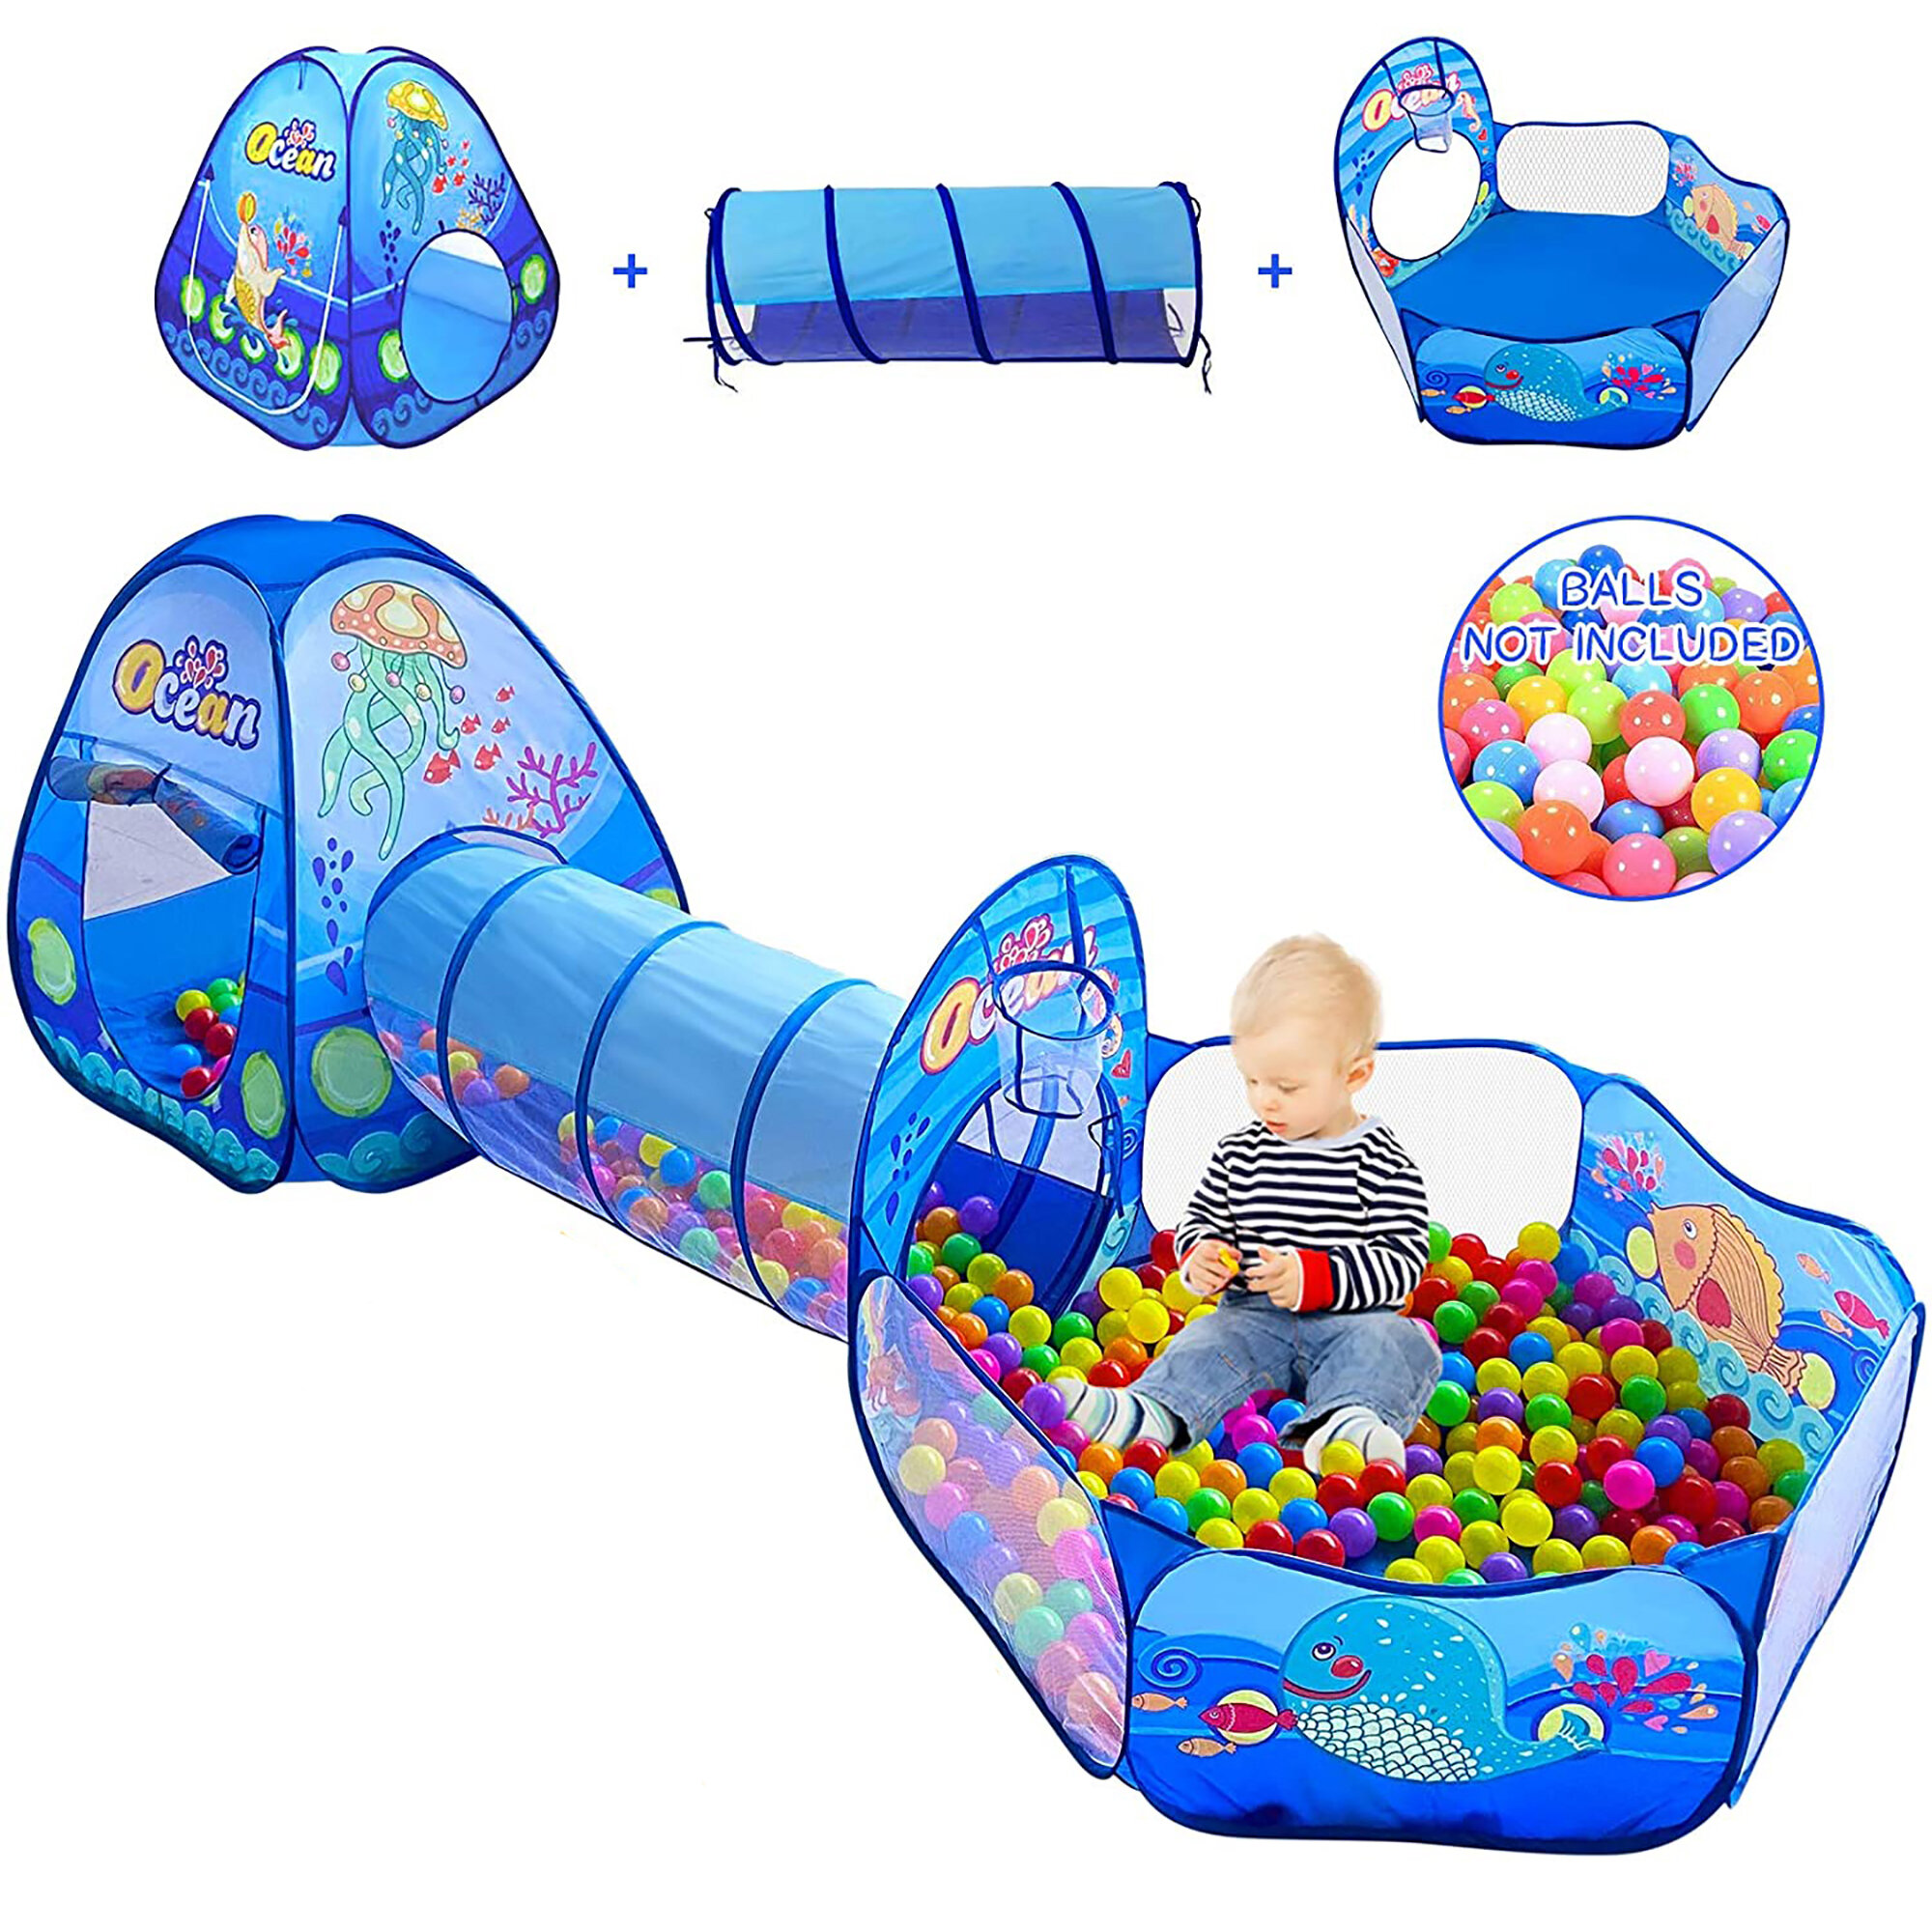 3 in 1 Play Tent House Tunnel Baby Kids Ball Pit Pool Indoor Outdoor Playground 